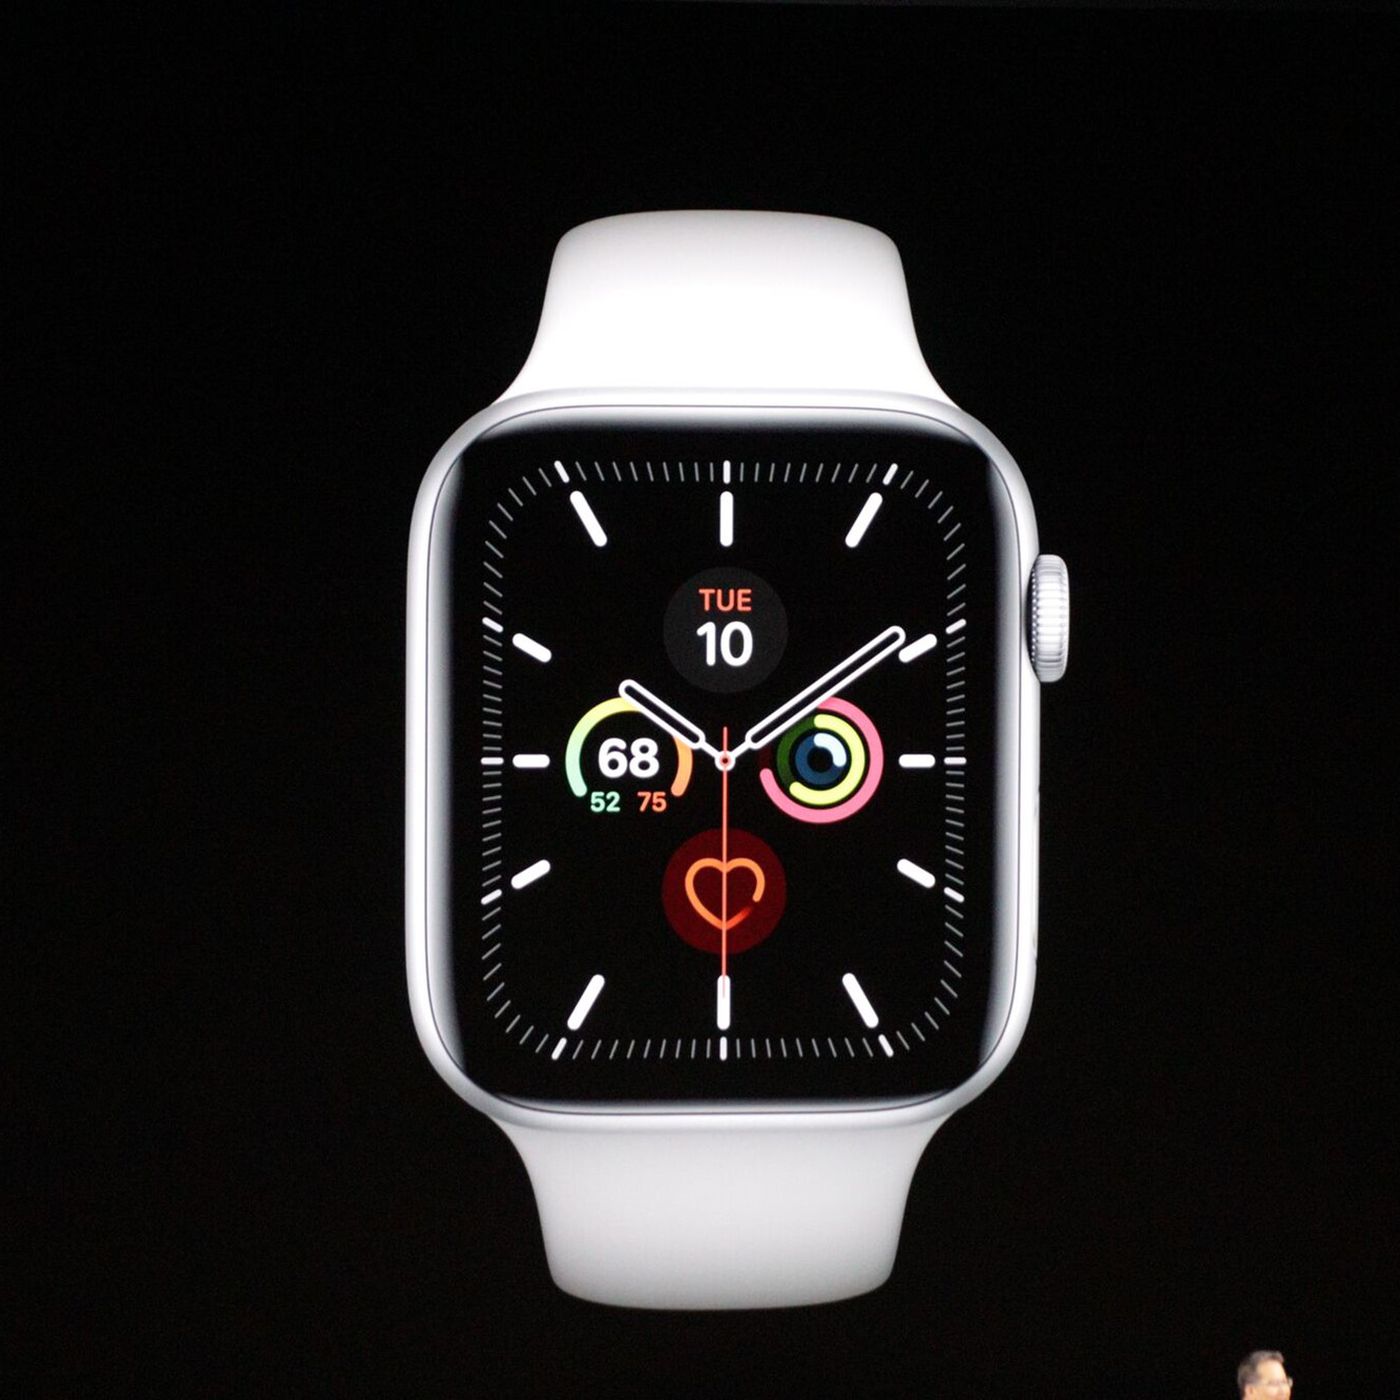 Apple Watch Series 5 has an always-on display and comes in titanium or  ceramic finishes - The Verge